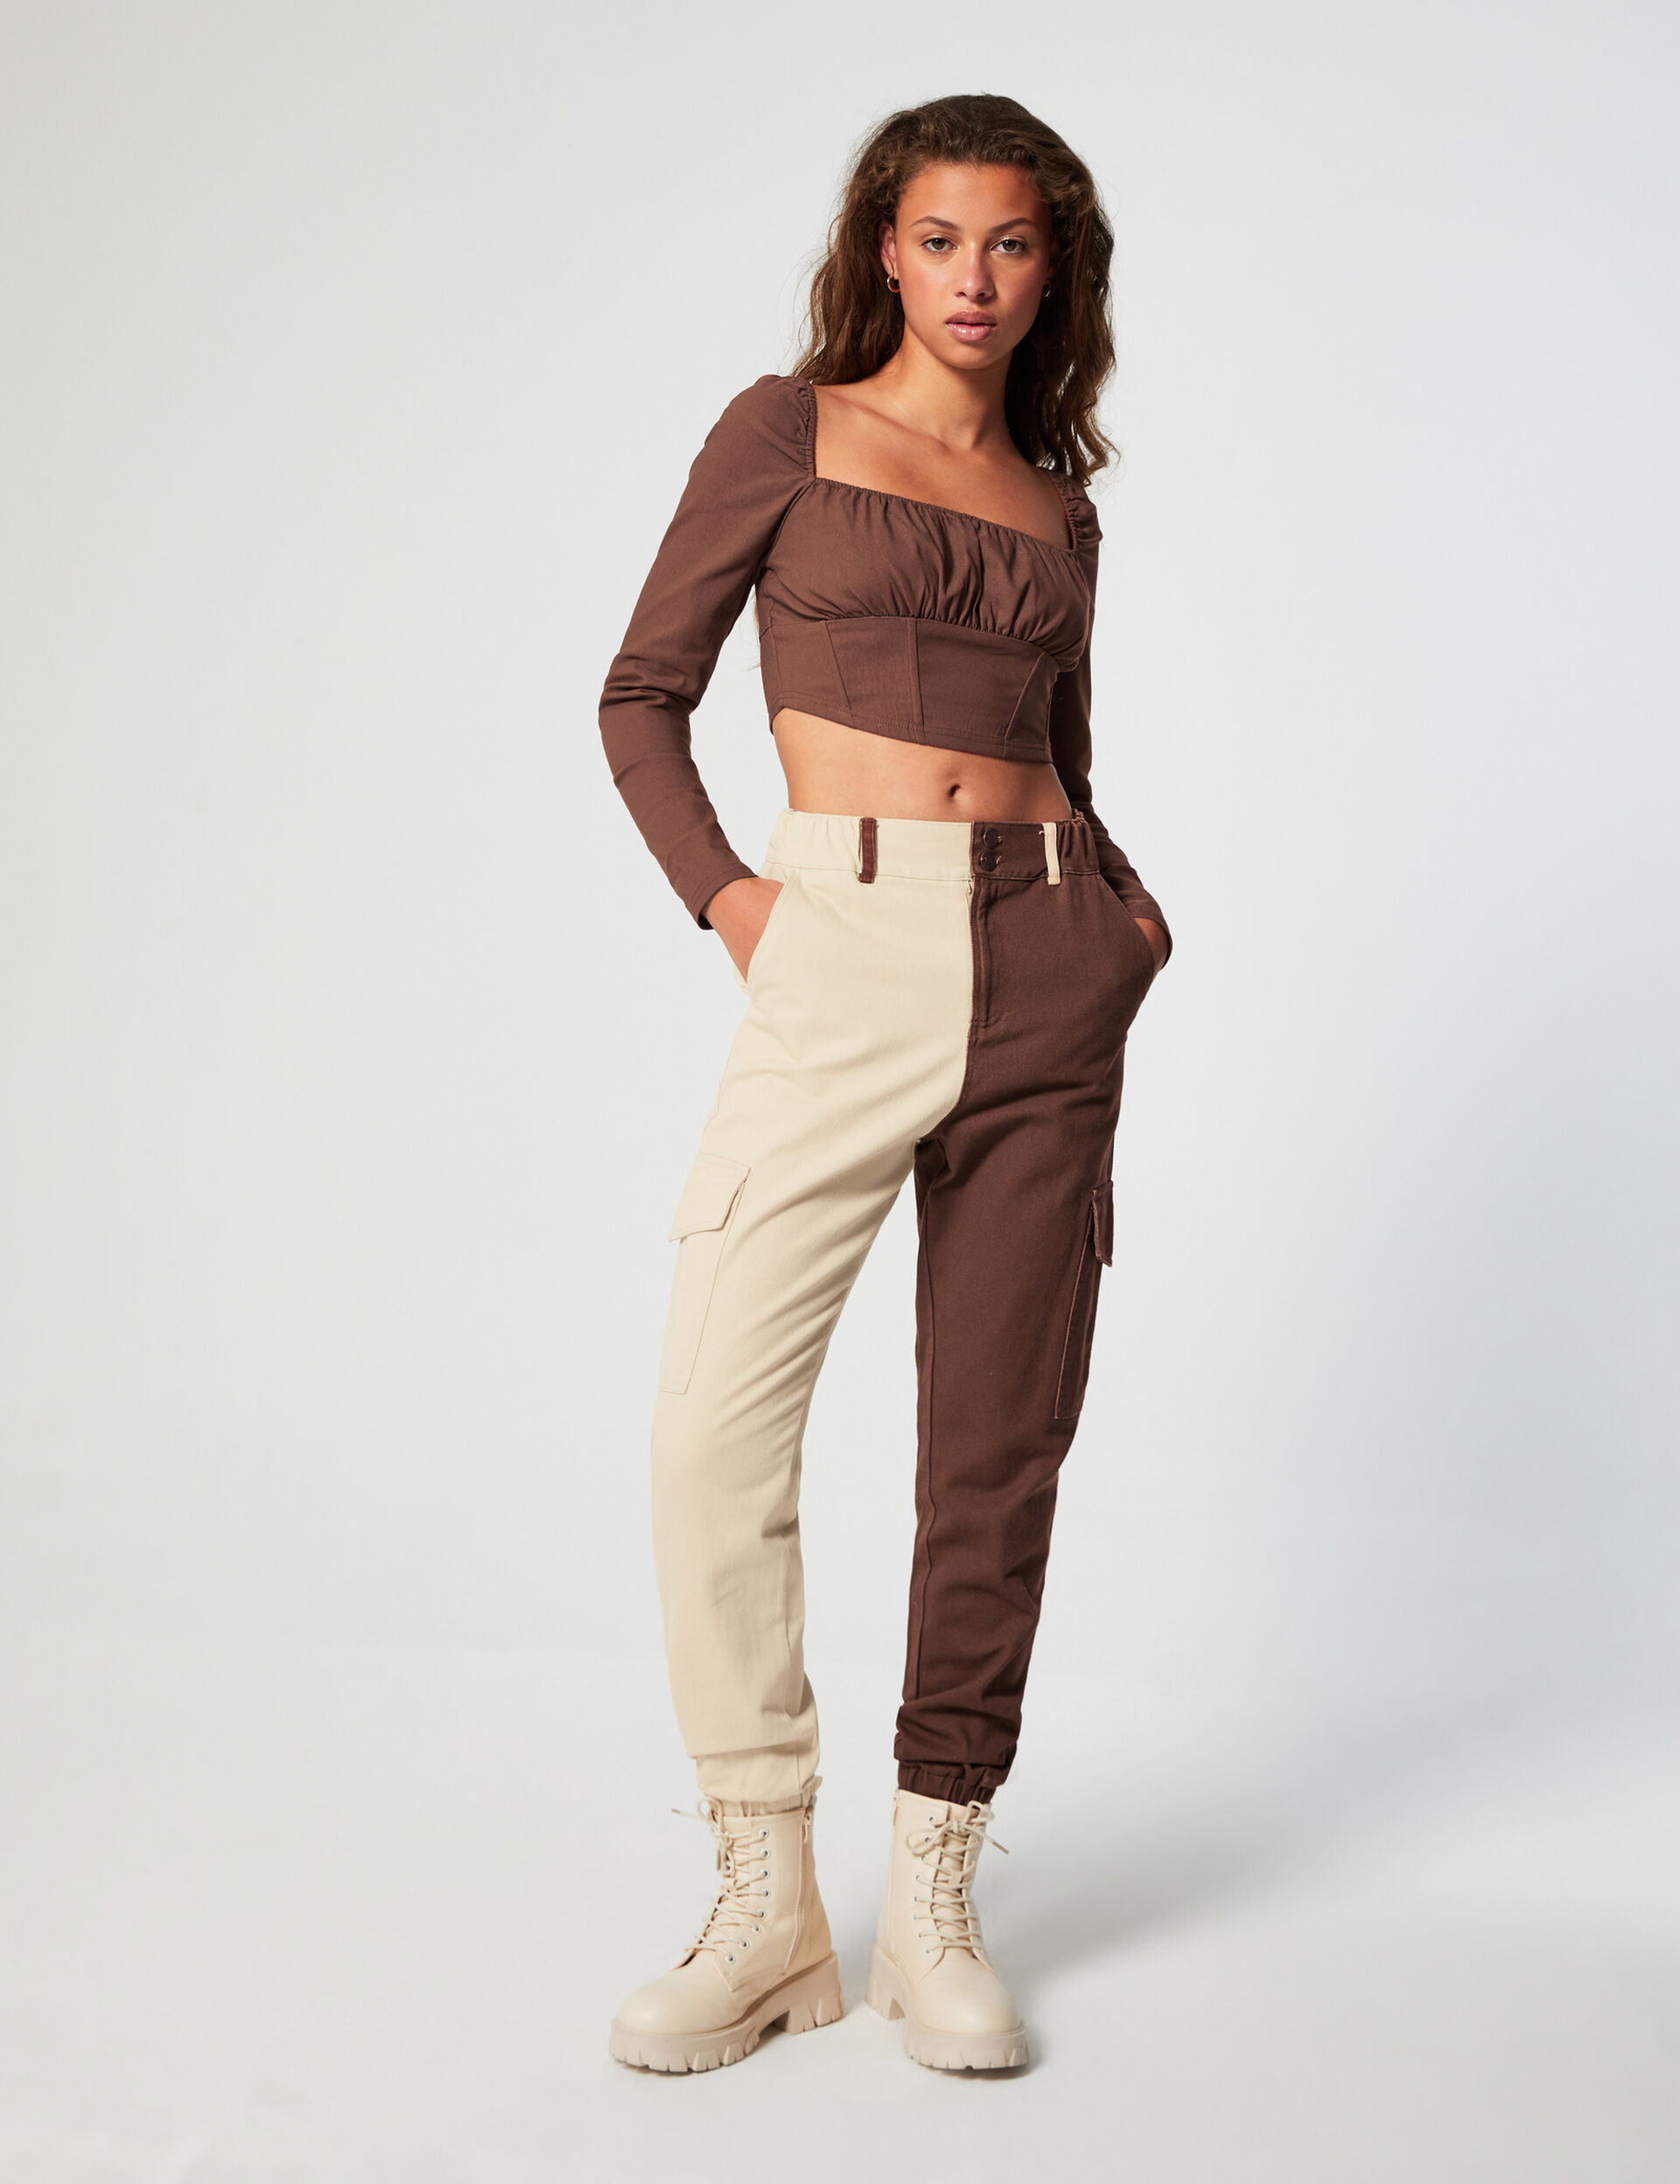 Two-tone cargo trousers